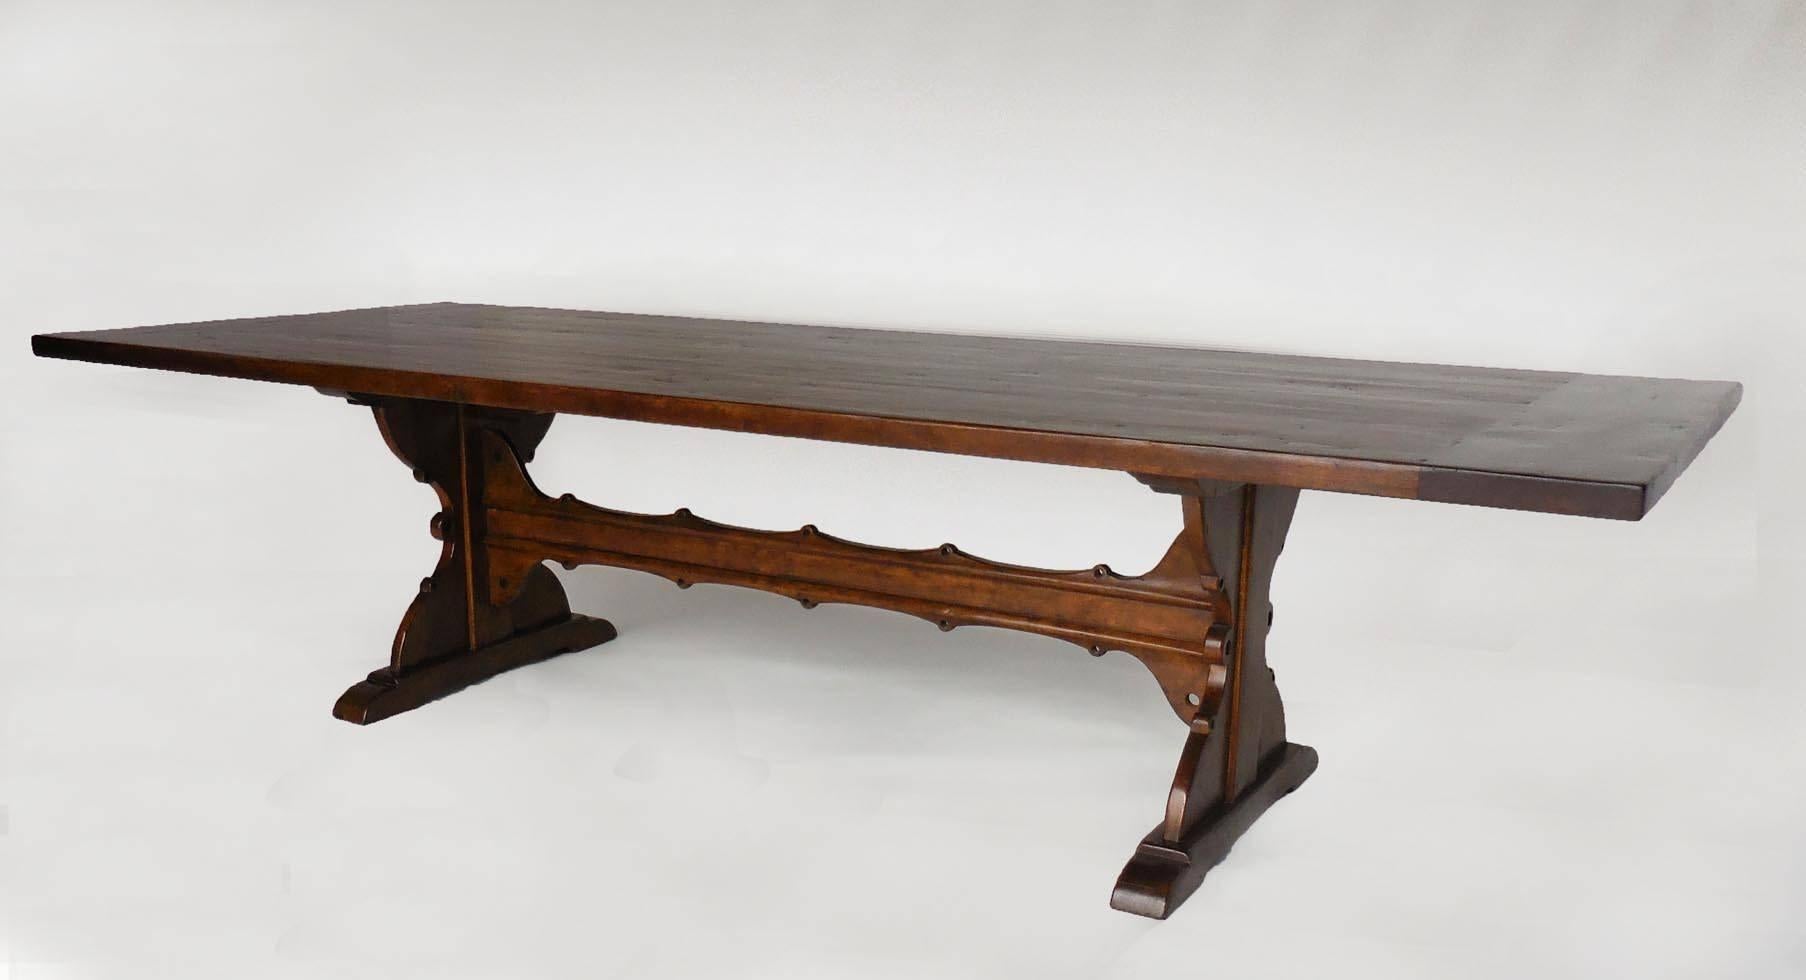 Custom 10' walnut dining table with carved trestle. Based on an antique Spanish monastery table. Large 24 inch overhang on each side created ample space for chairs. Top has breadboards on each end. Great finish. Beautiful table! Can be made in any